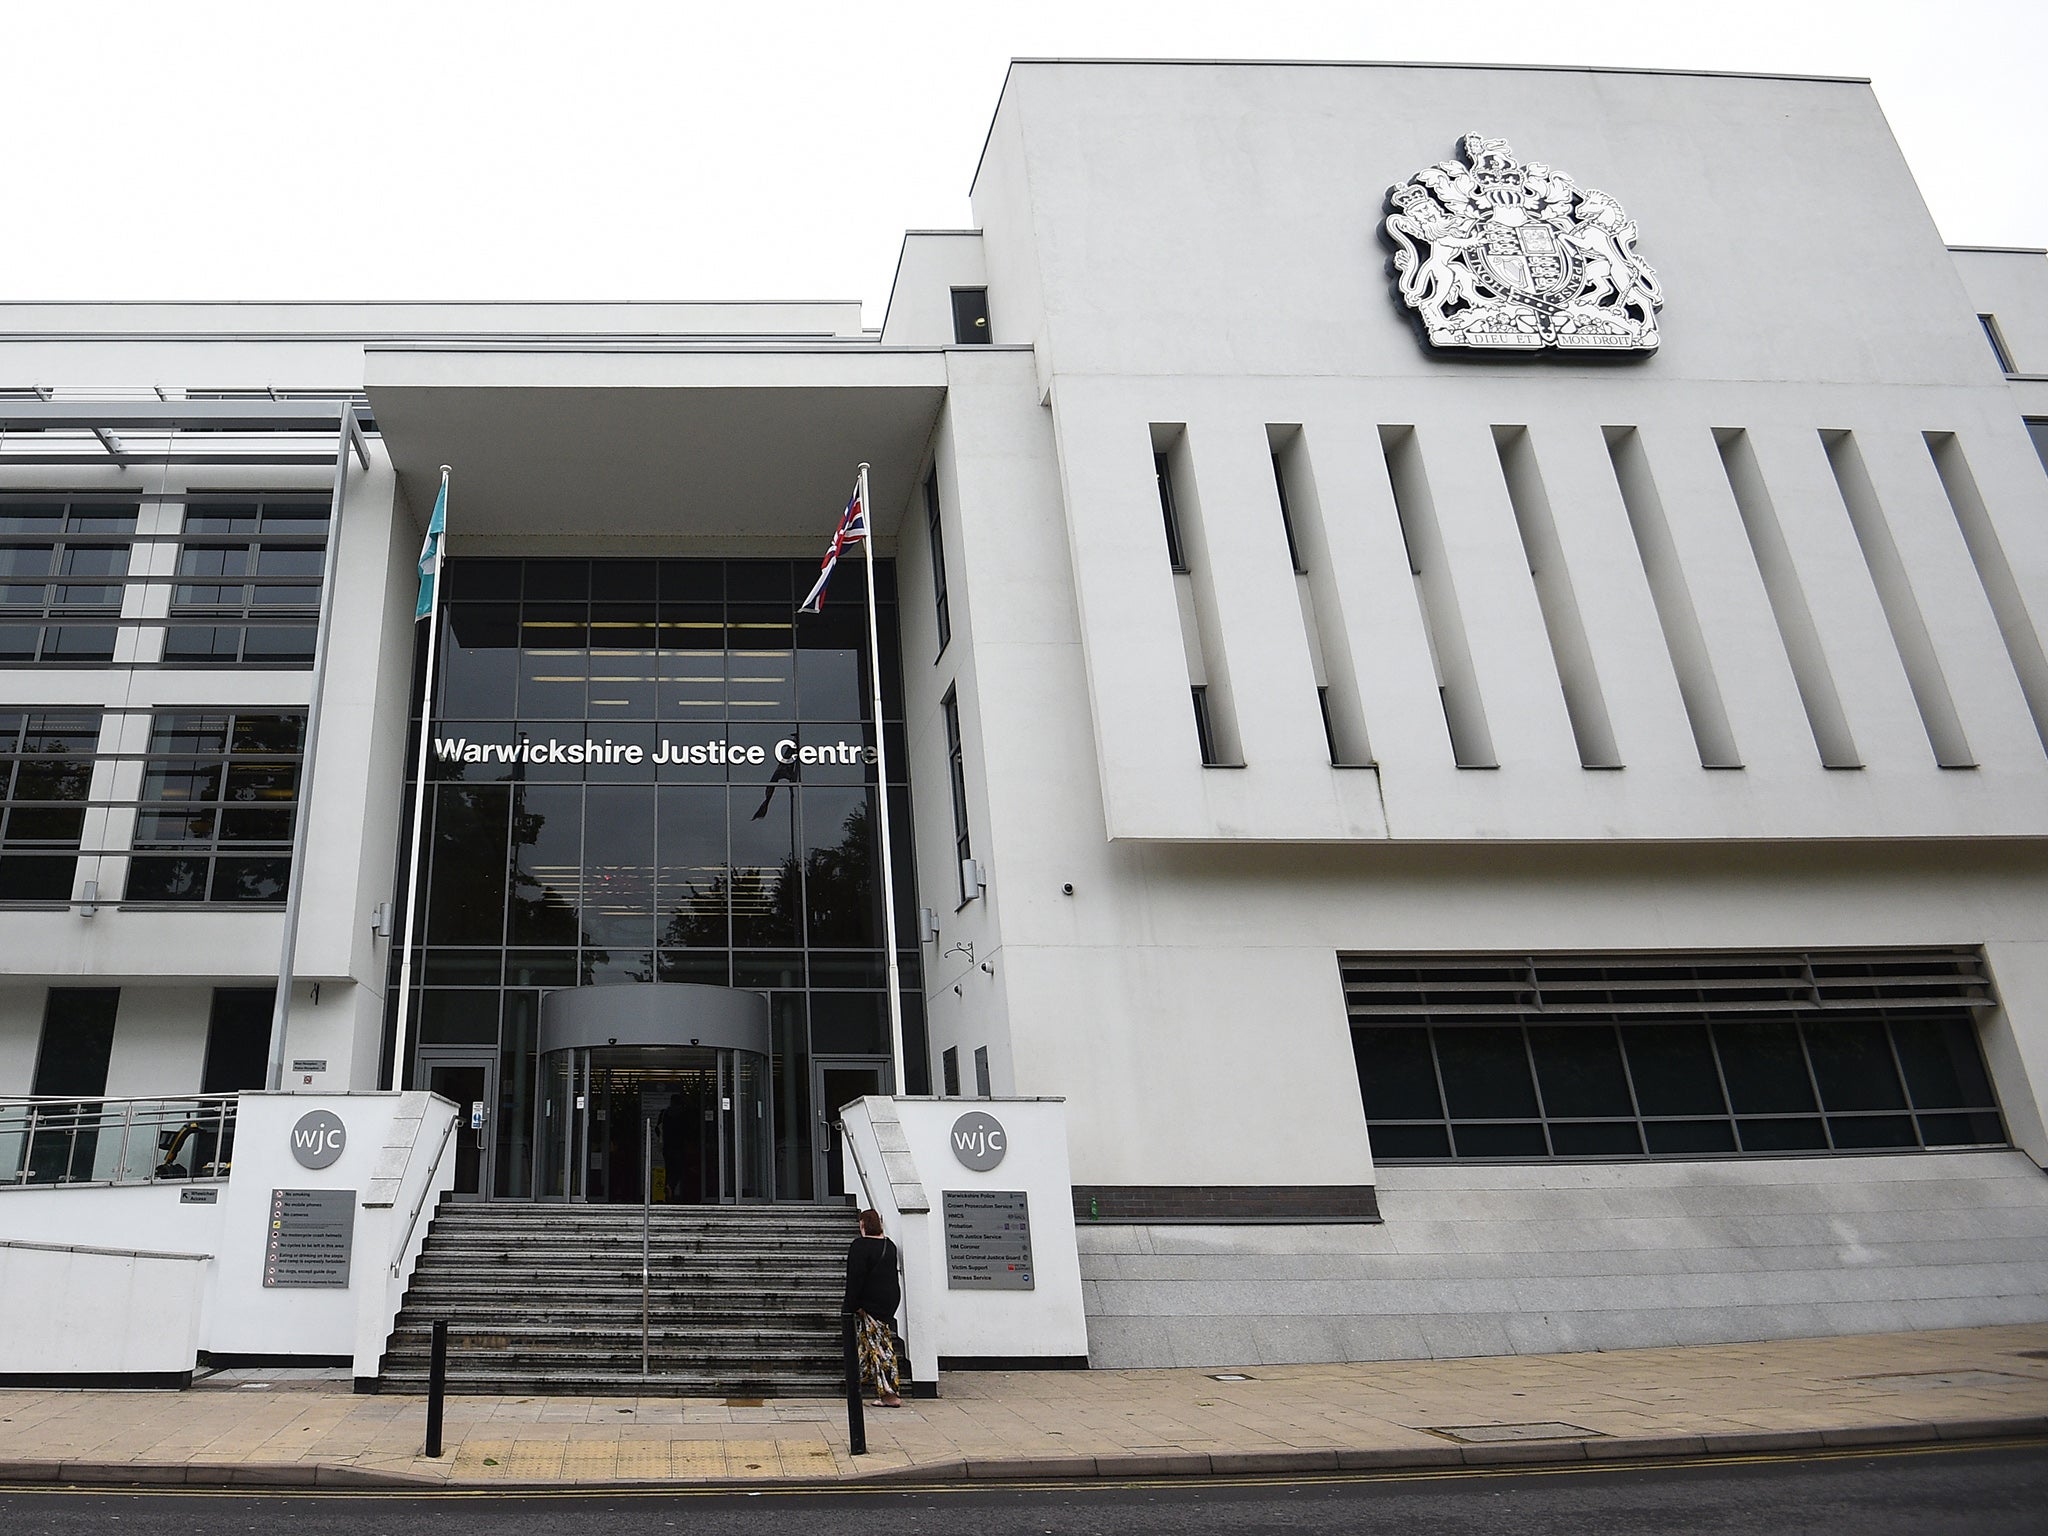 Greenall pleaded guilty to two counts of rape and one of oral rape at Warwickshire Crown Court